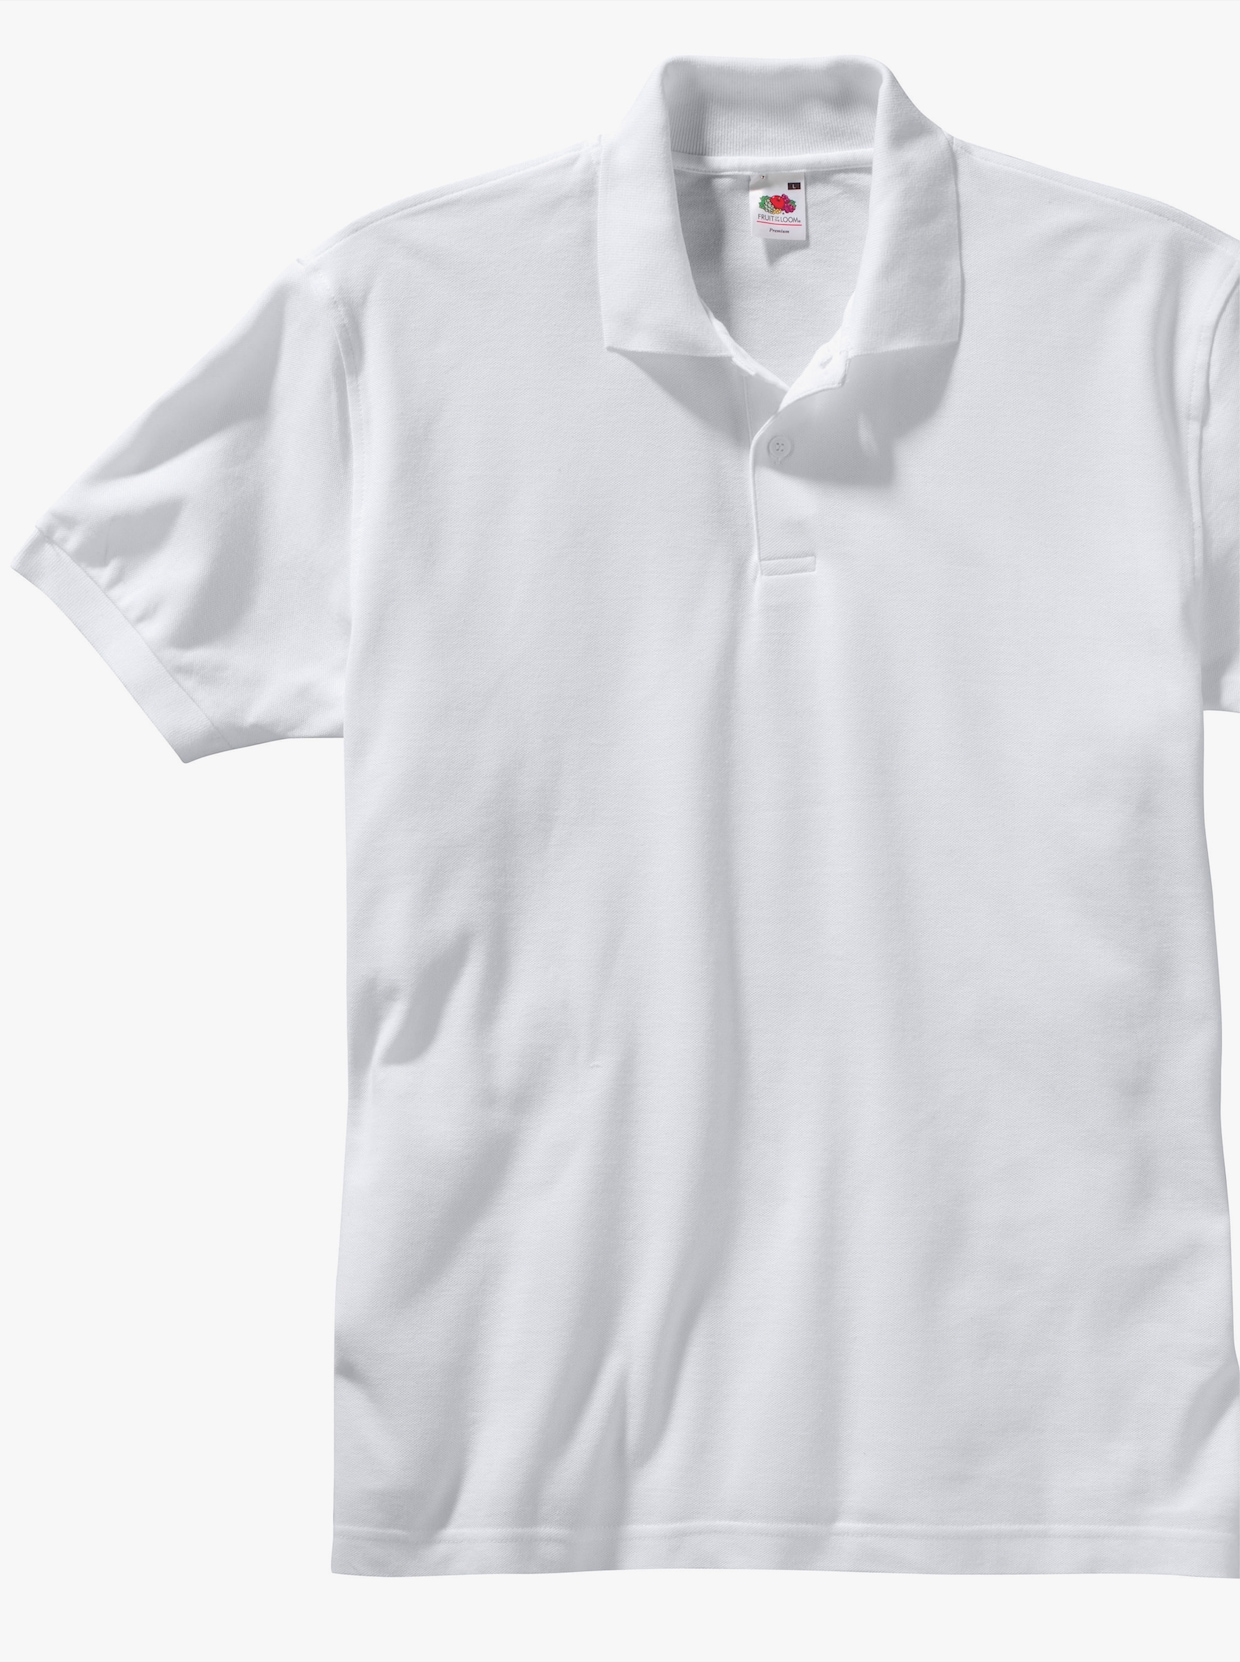 Fruit of the Loom Poloshirt - weiss